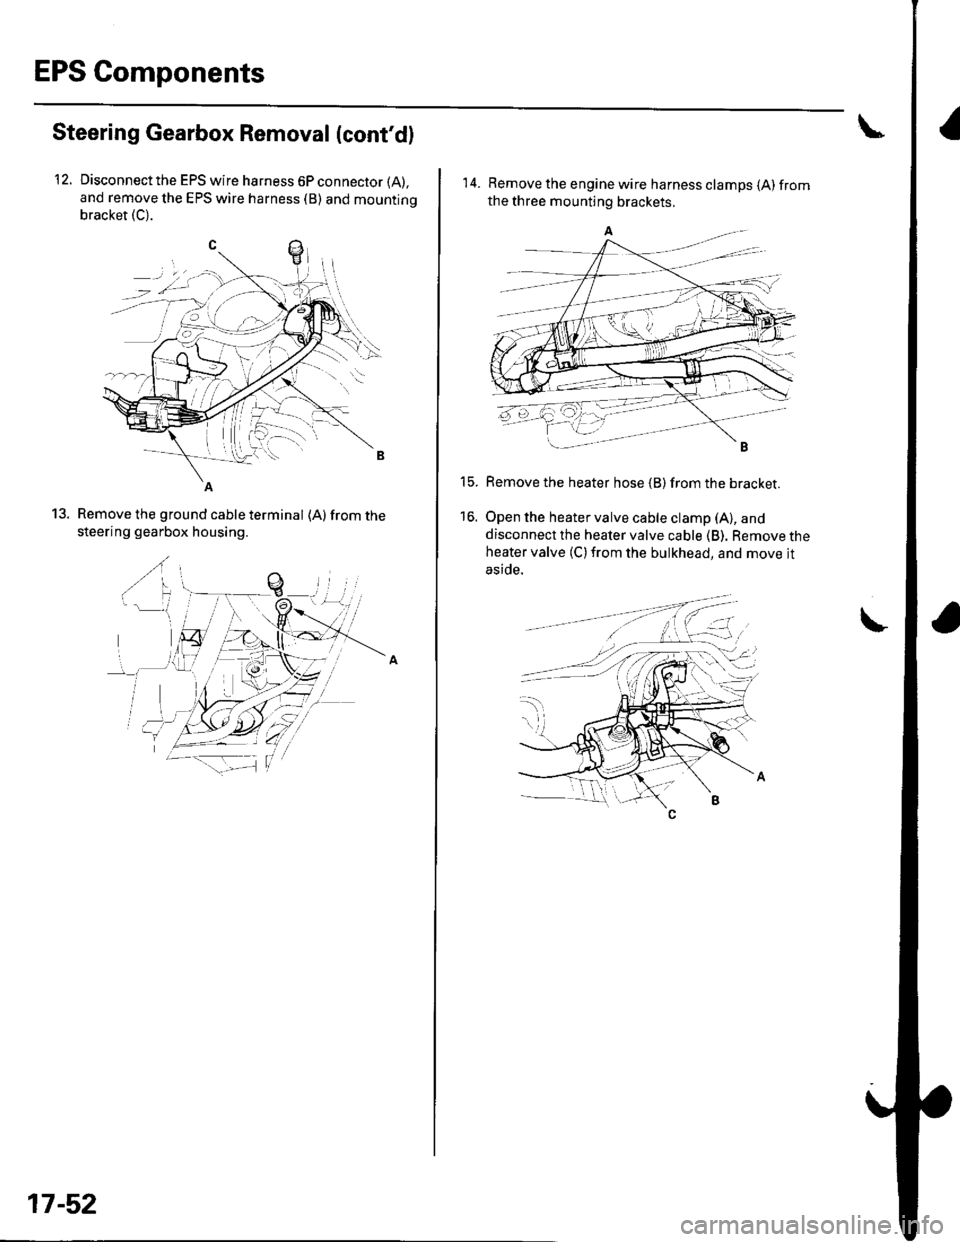 HONDA CIVIC 2003 7.G Workshop Manual EPS Components
Steering Gearbox Removal (contd)
Disconnect the EPS wire harness 6P connector (A),
and remove the EPS wire harness (B) and mountino
bracket (C).
12.
Remove the ground cable terminal (A